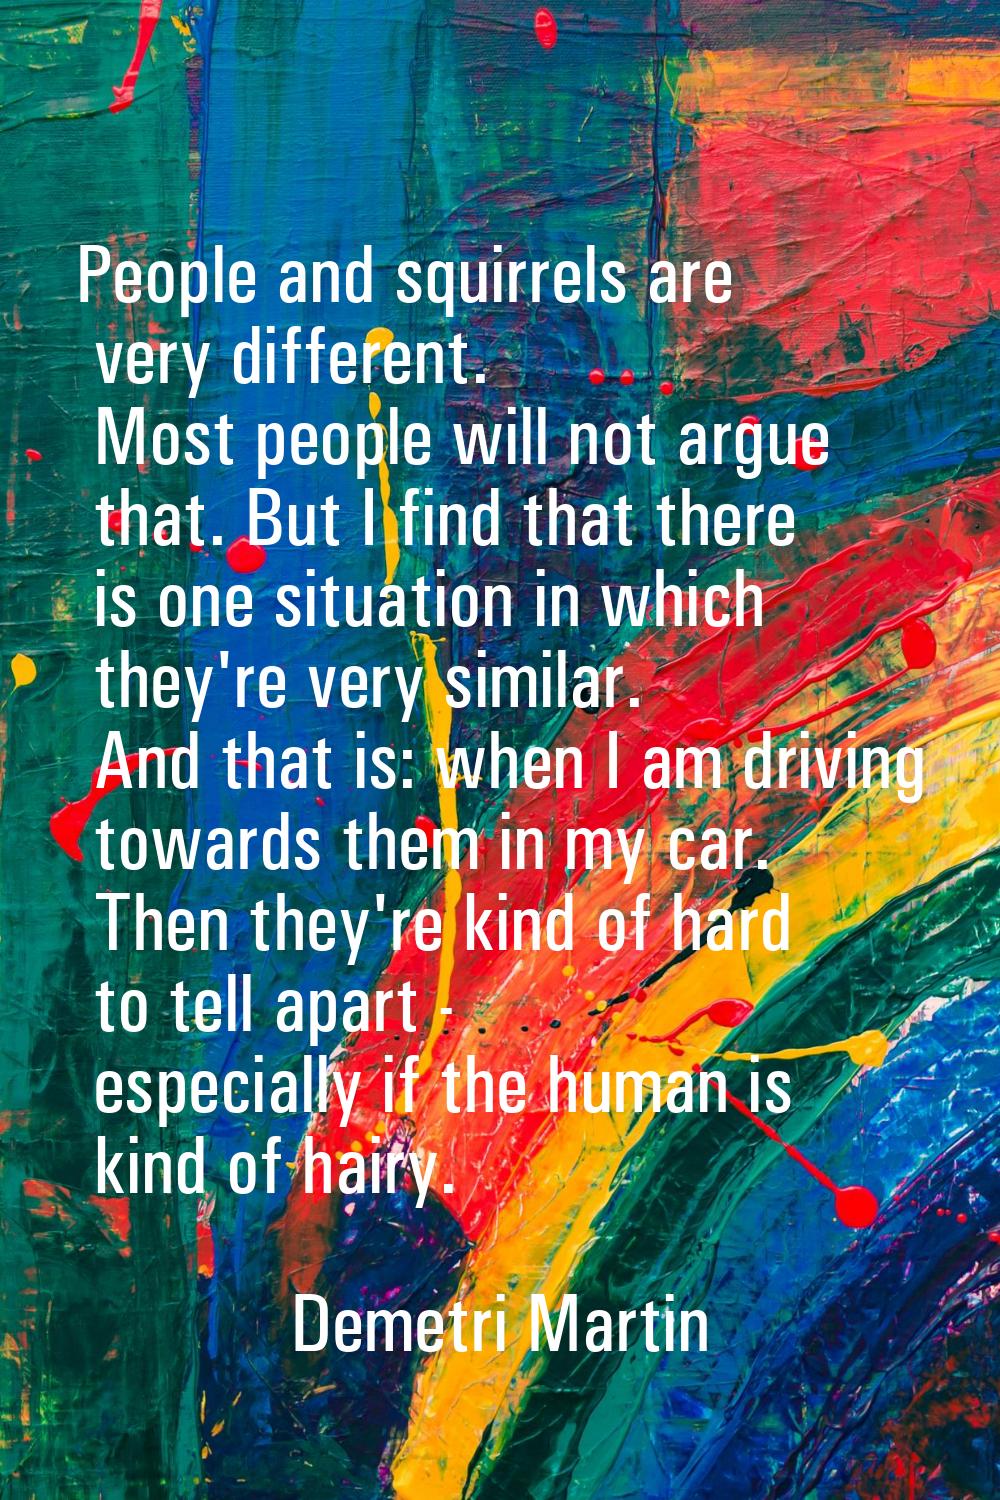 People and squirrels are very different. Most people will not argue that. But I find that there is 